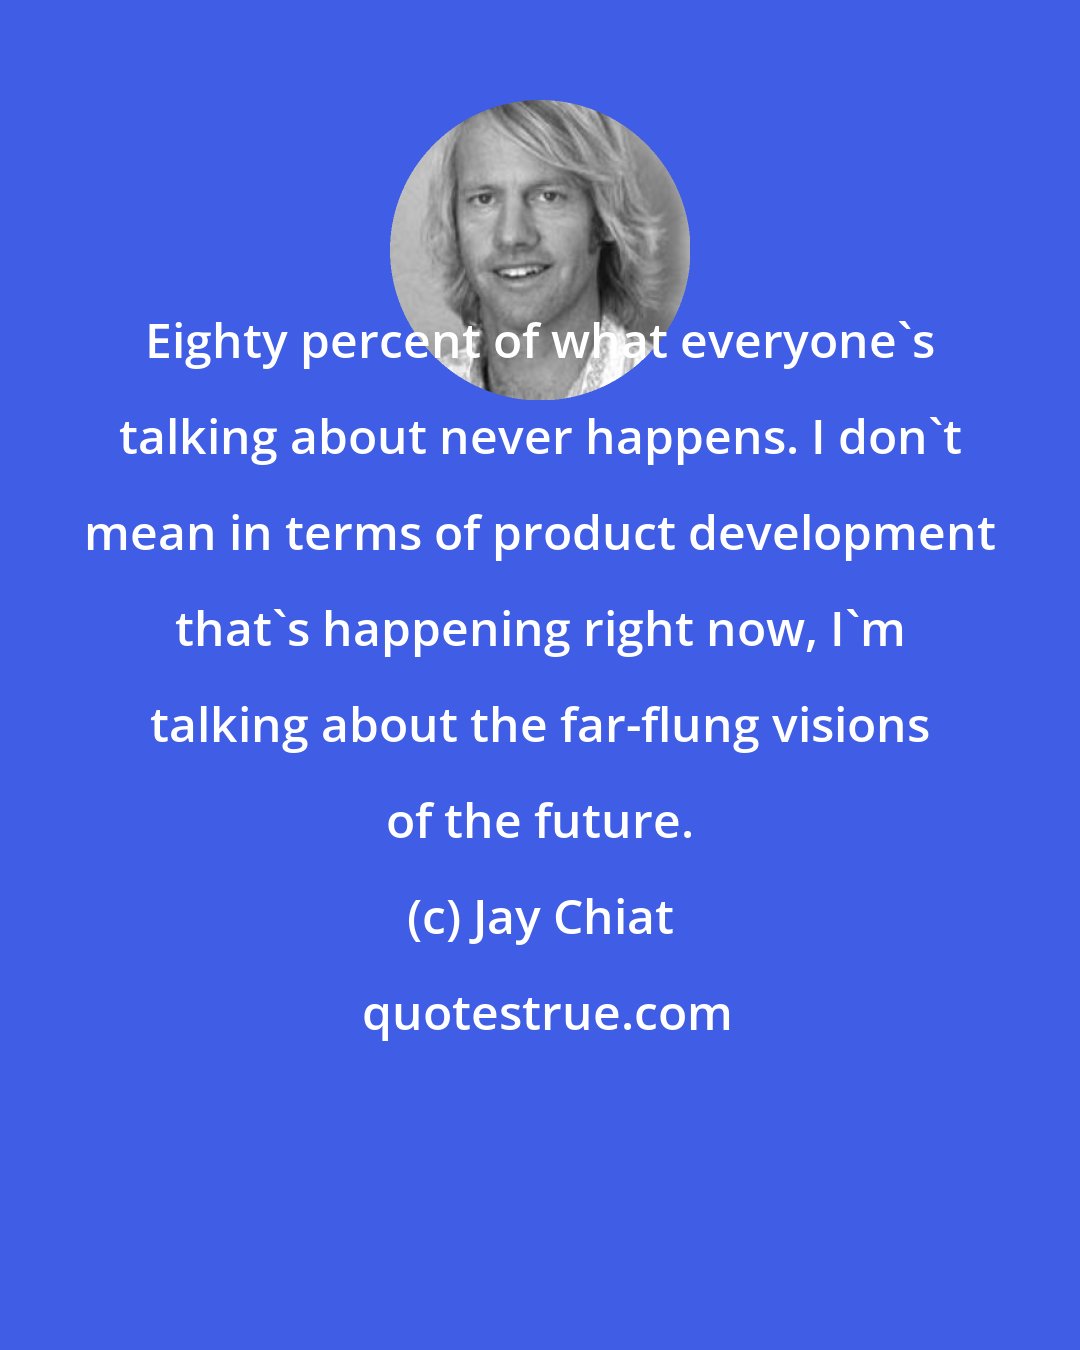 Jay Chiat: Eighty percent of what everyone's talking about never happens. I don't mean in terms of product development that's happening right now, I'm talking about the far-flung visions of the future.